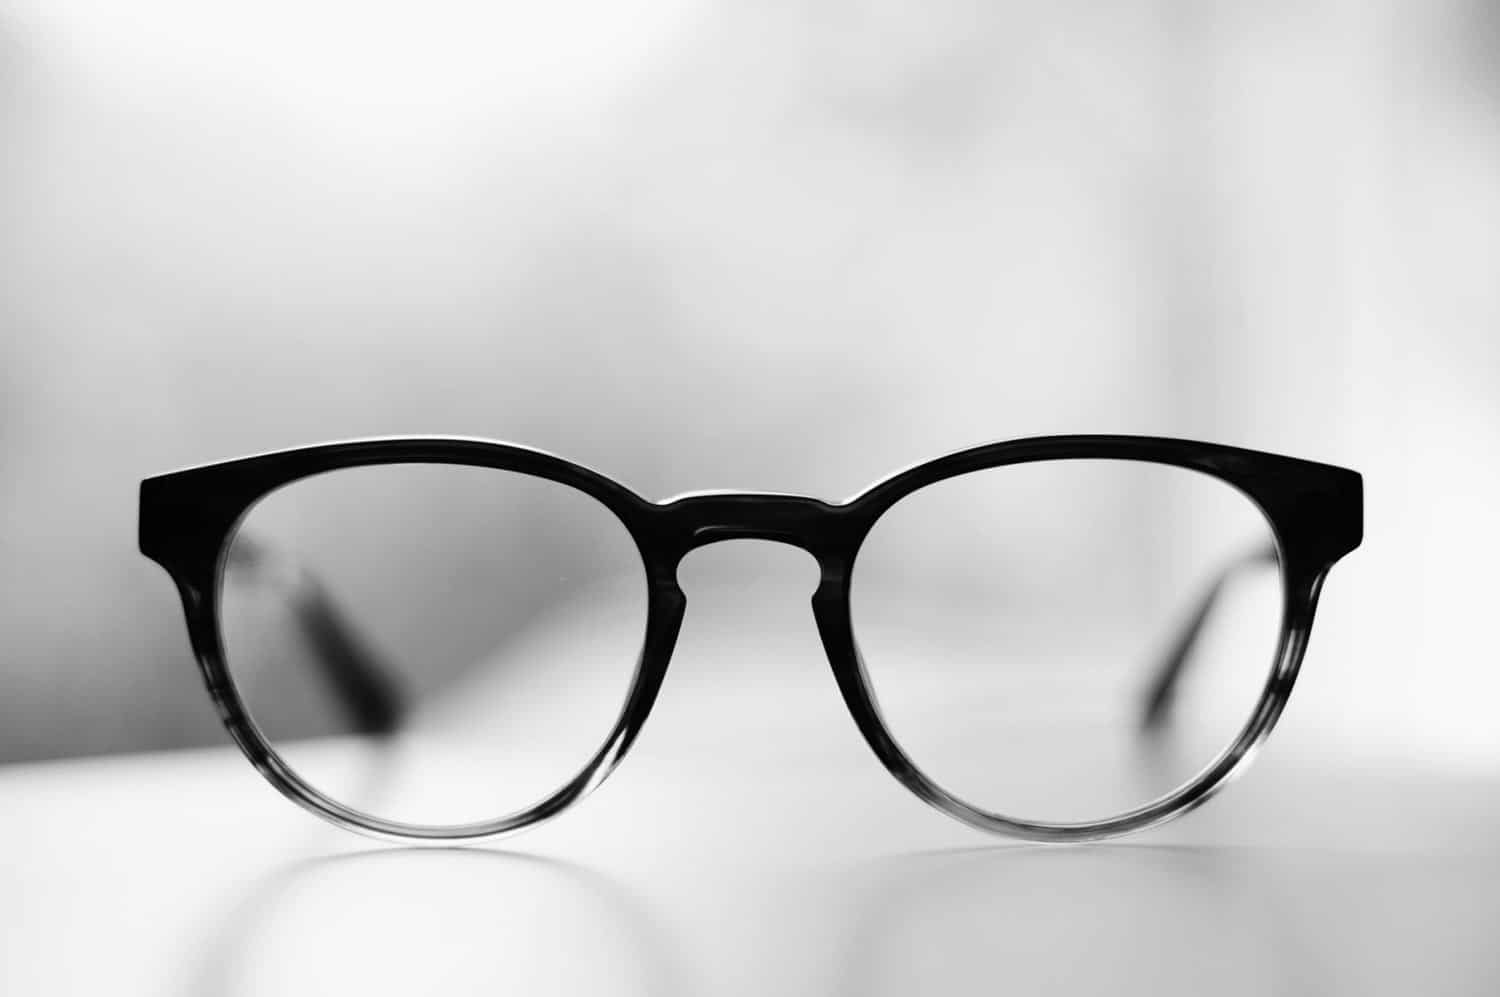 Your eyeglass prescription includes measurements and the recommended magnification power, as well as information about any astigmatism you may have that can be addressed with the right eyeglasses.